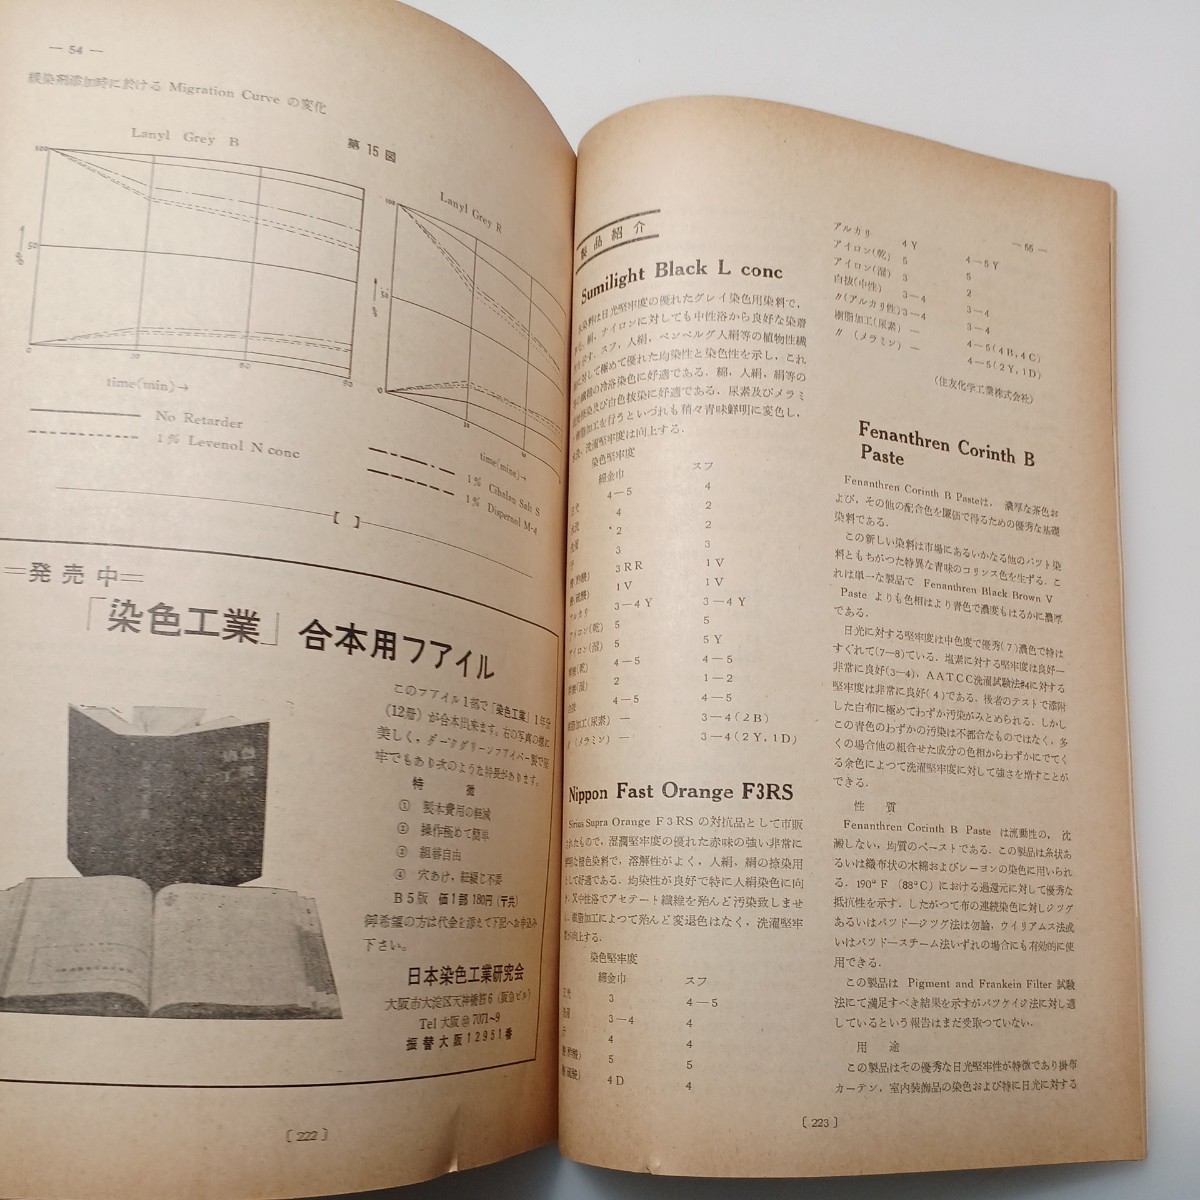 zaa-526![. color industry ] 1958 year 53 number V0l.6 No.3. charge *. color *..* fiber * resin * processing * equipment Japan . color industry research .